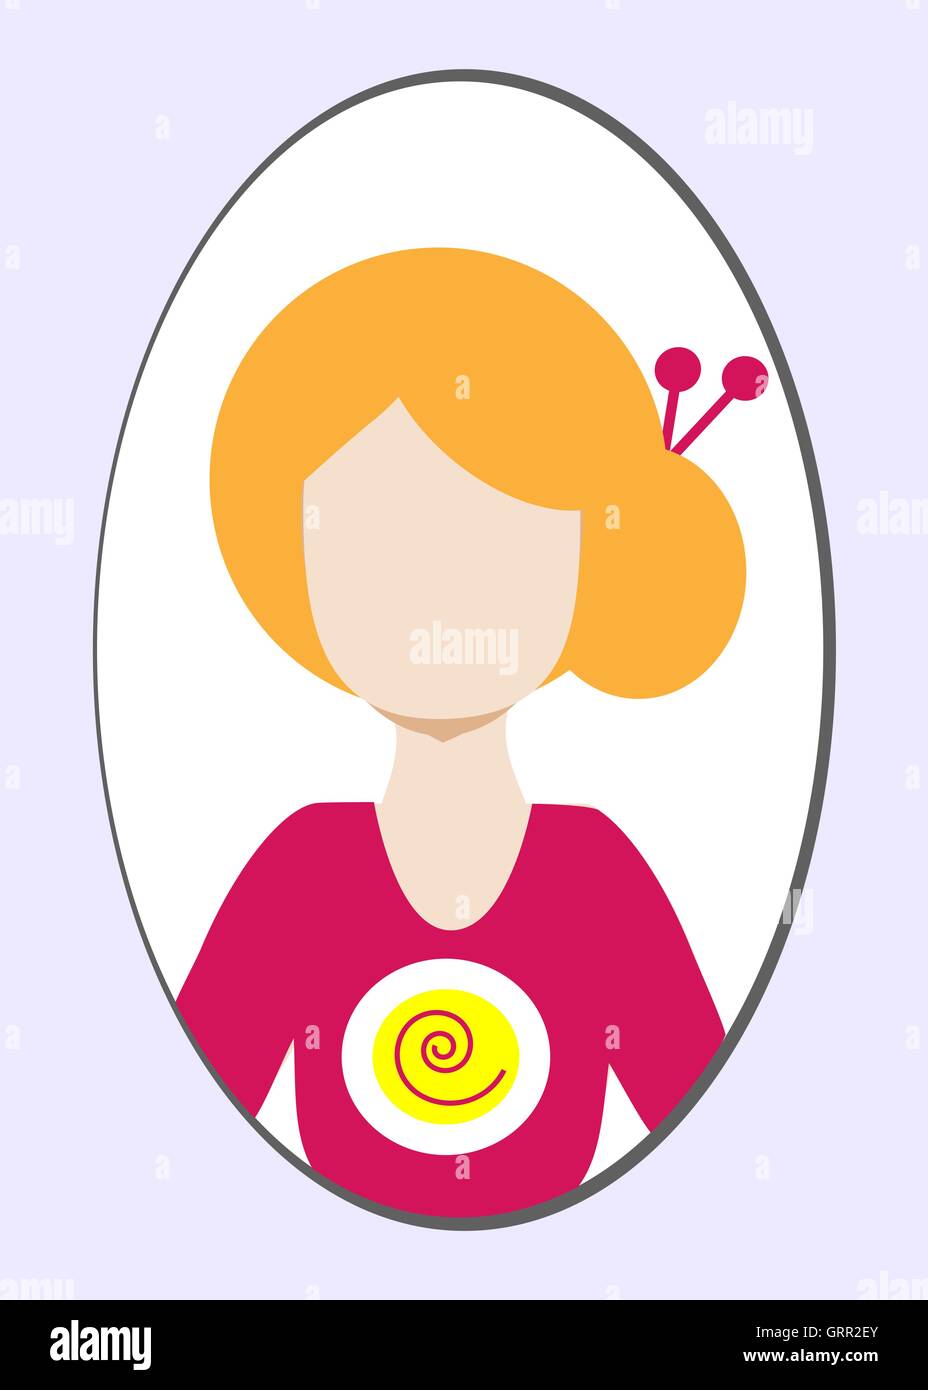 Female avatar or pictogram for social networks. Modern flat colorful style. Vector Stock Vector